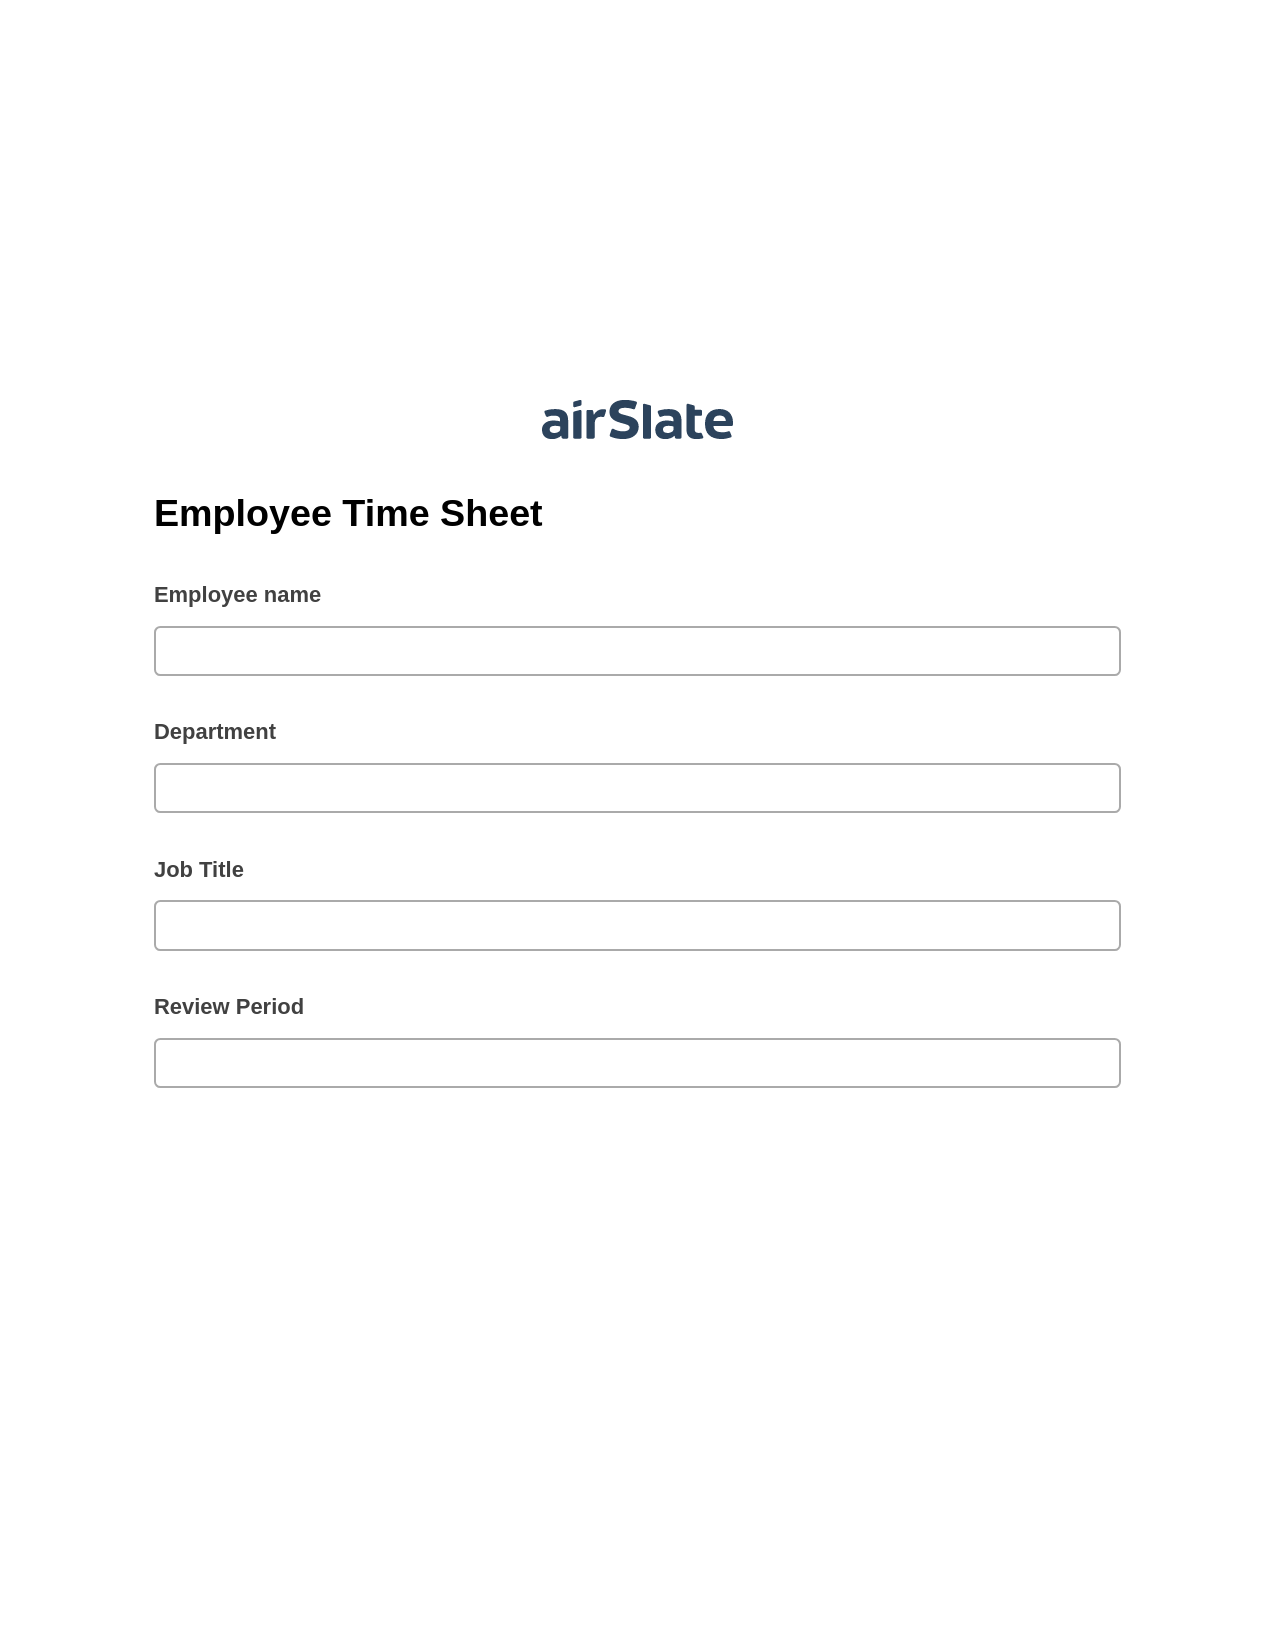 Multirole Employee Time Sheet Pre-fill Dropdowns from CSV file Bot, Custom Field's Value Bot, Text Message Notification Postfinish Bot